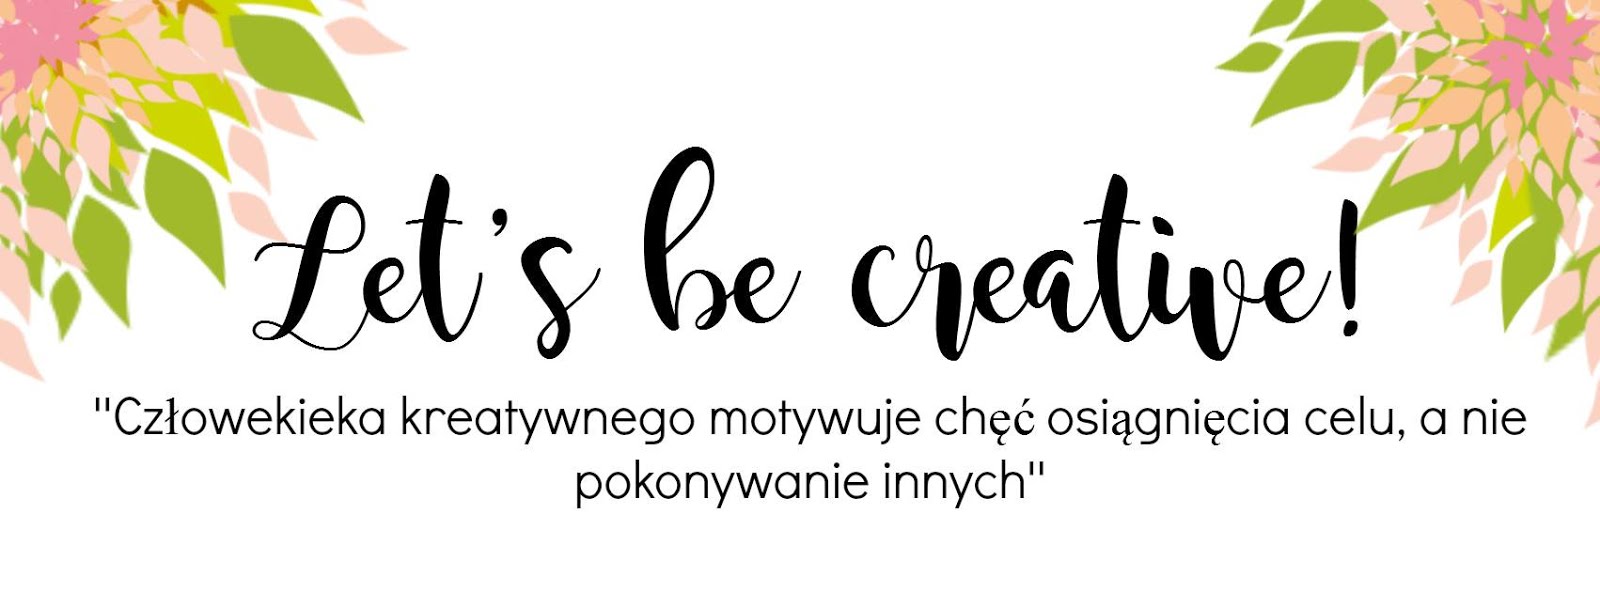 Let's be creative!